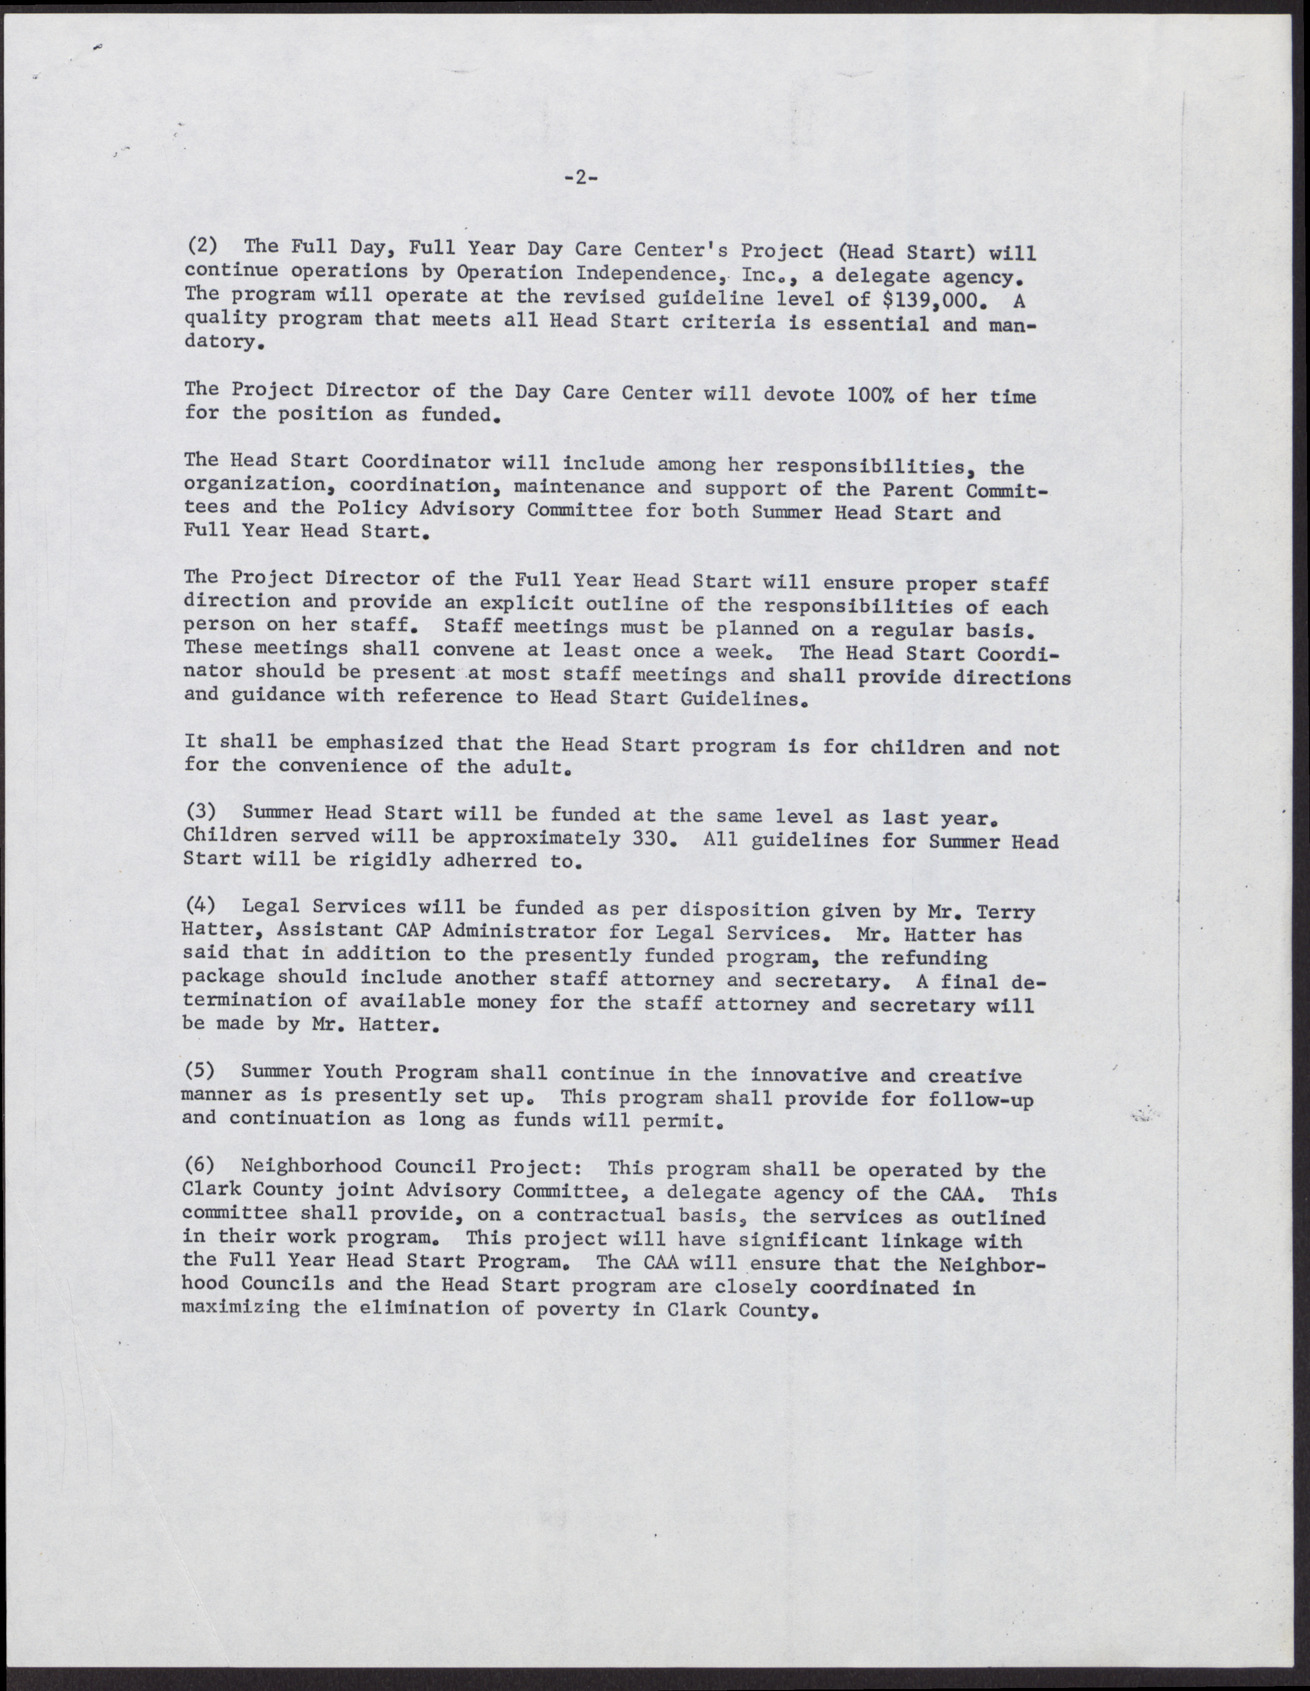 Letter to Economic Opportunity Board from Carlton Dias (3 pages), December 9, 1968, page 2